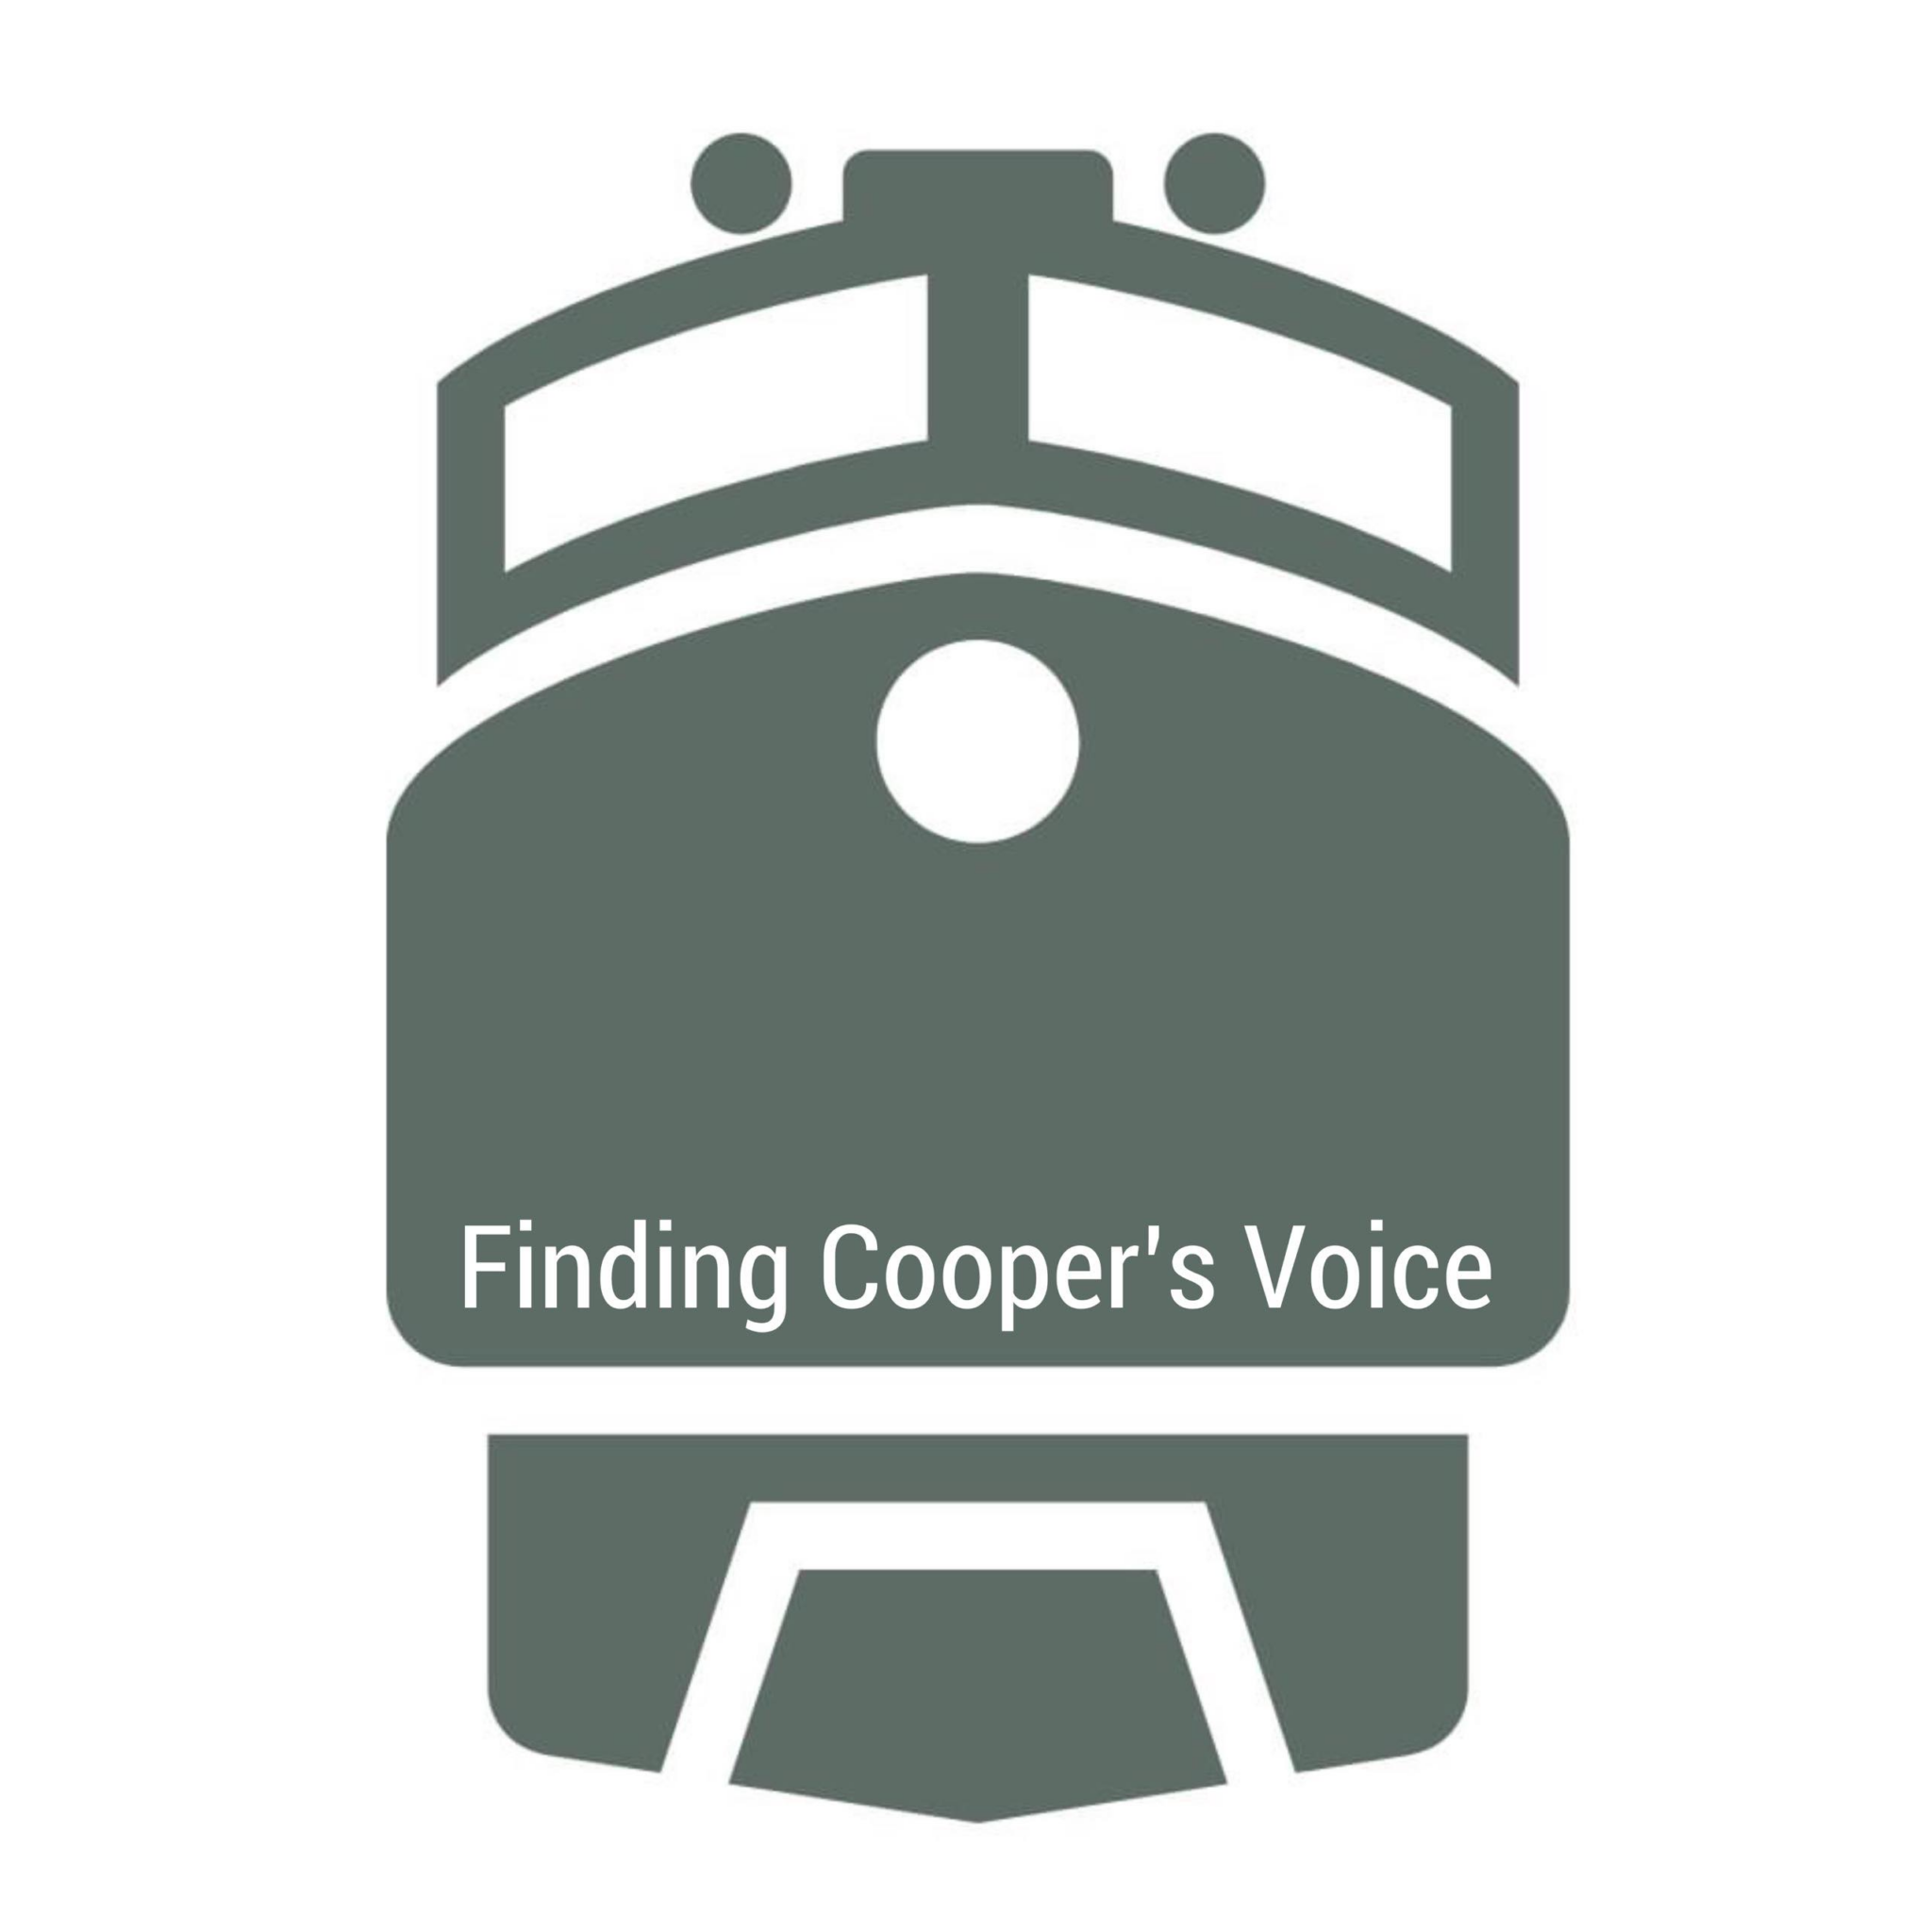 https://www.findingcoopersvoice.com/wp-content/uploads/2022/05/findingcoopersvoice.png